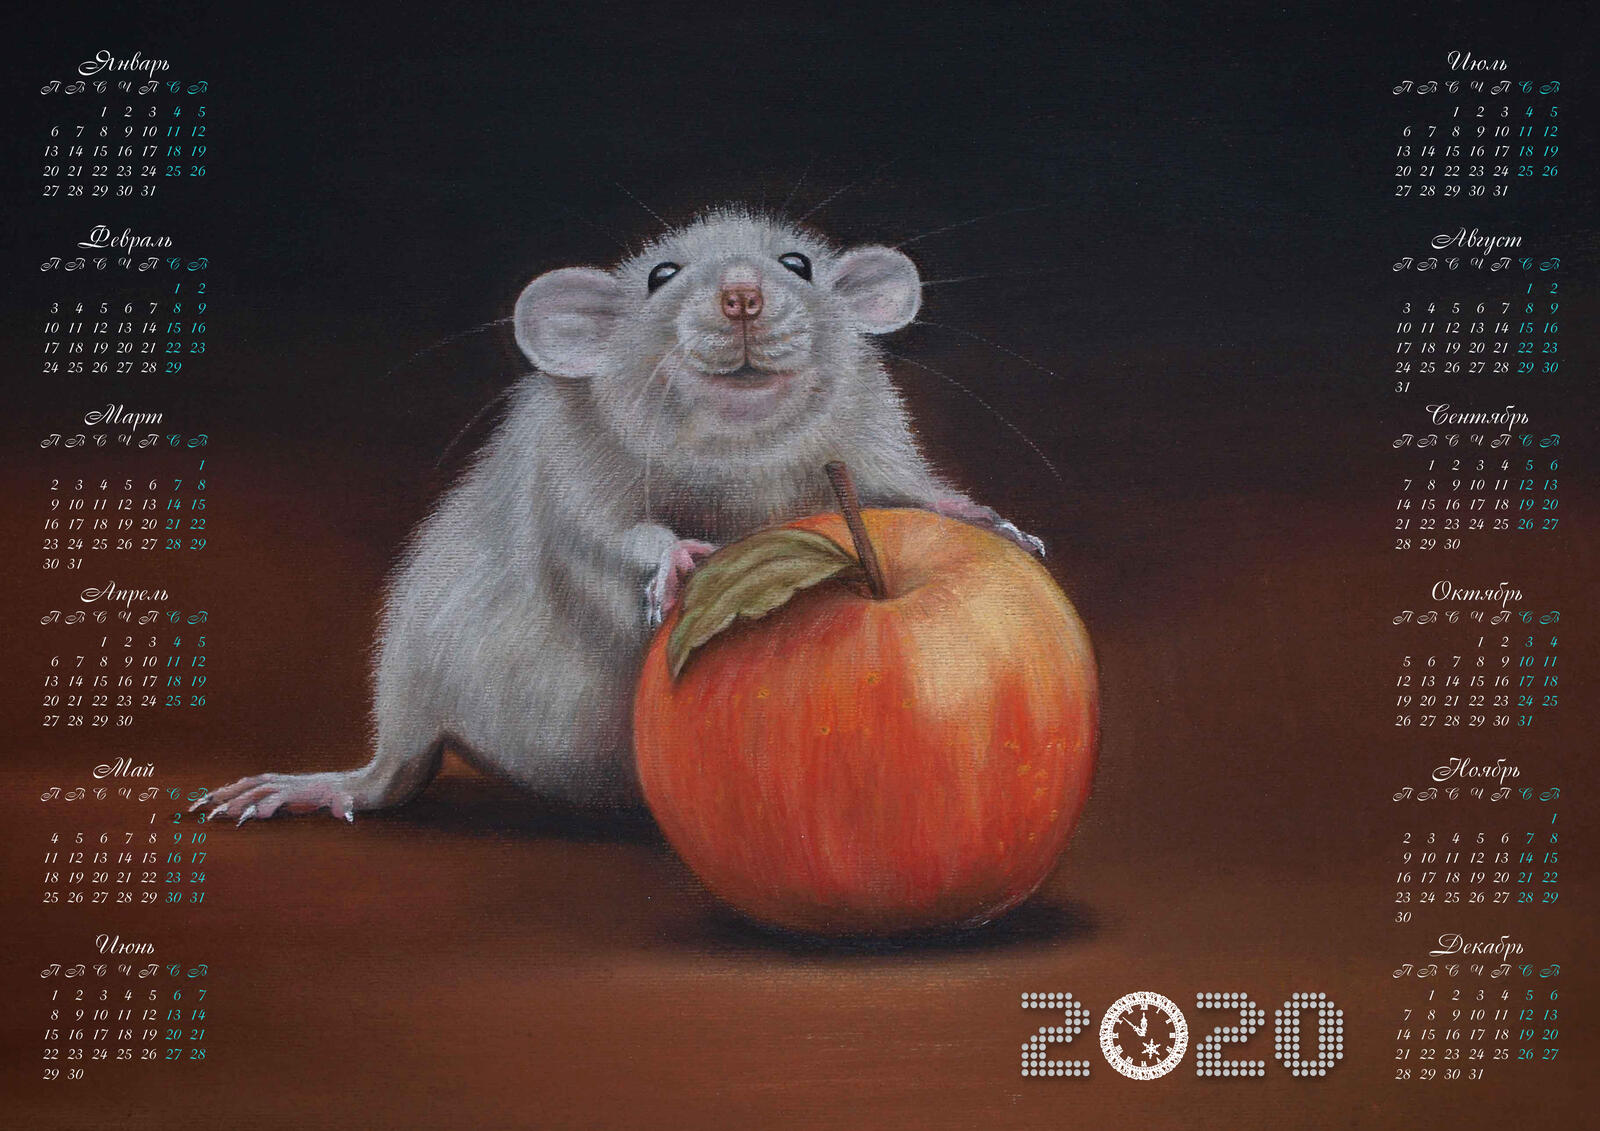 Free photo Calendar for the year 2020, the rat and the Apple